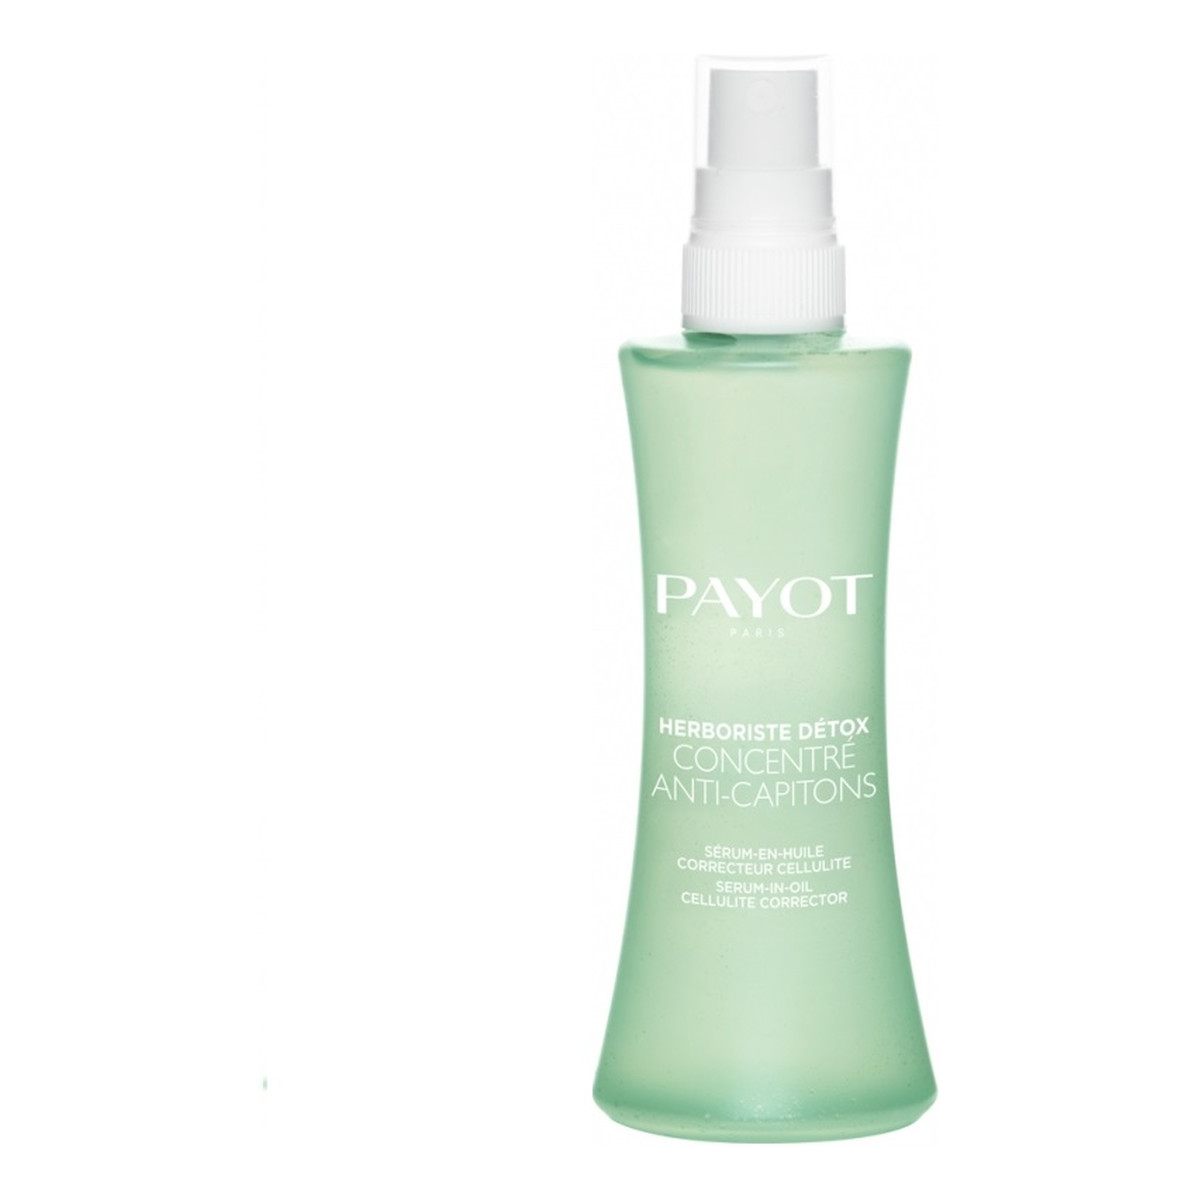 Payot Herboriste detox anti-capitons concentrate olejowe serum antycellulitowe 125ml